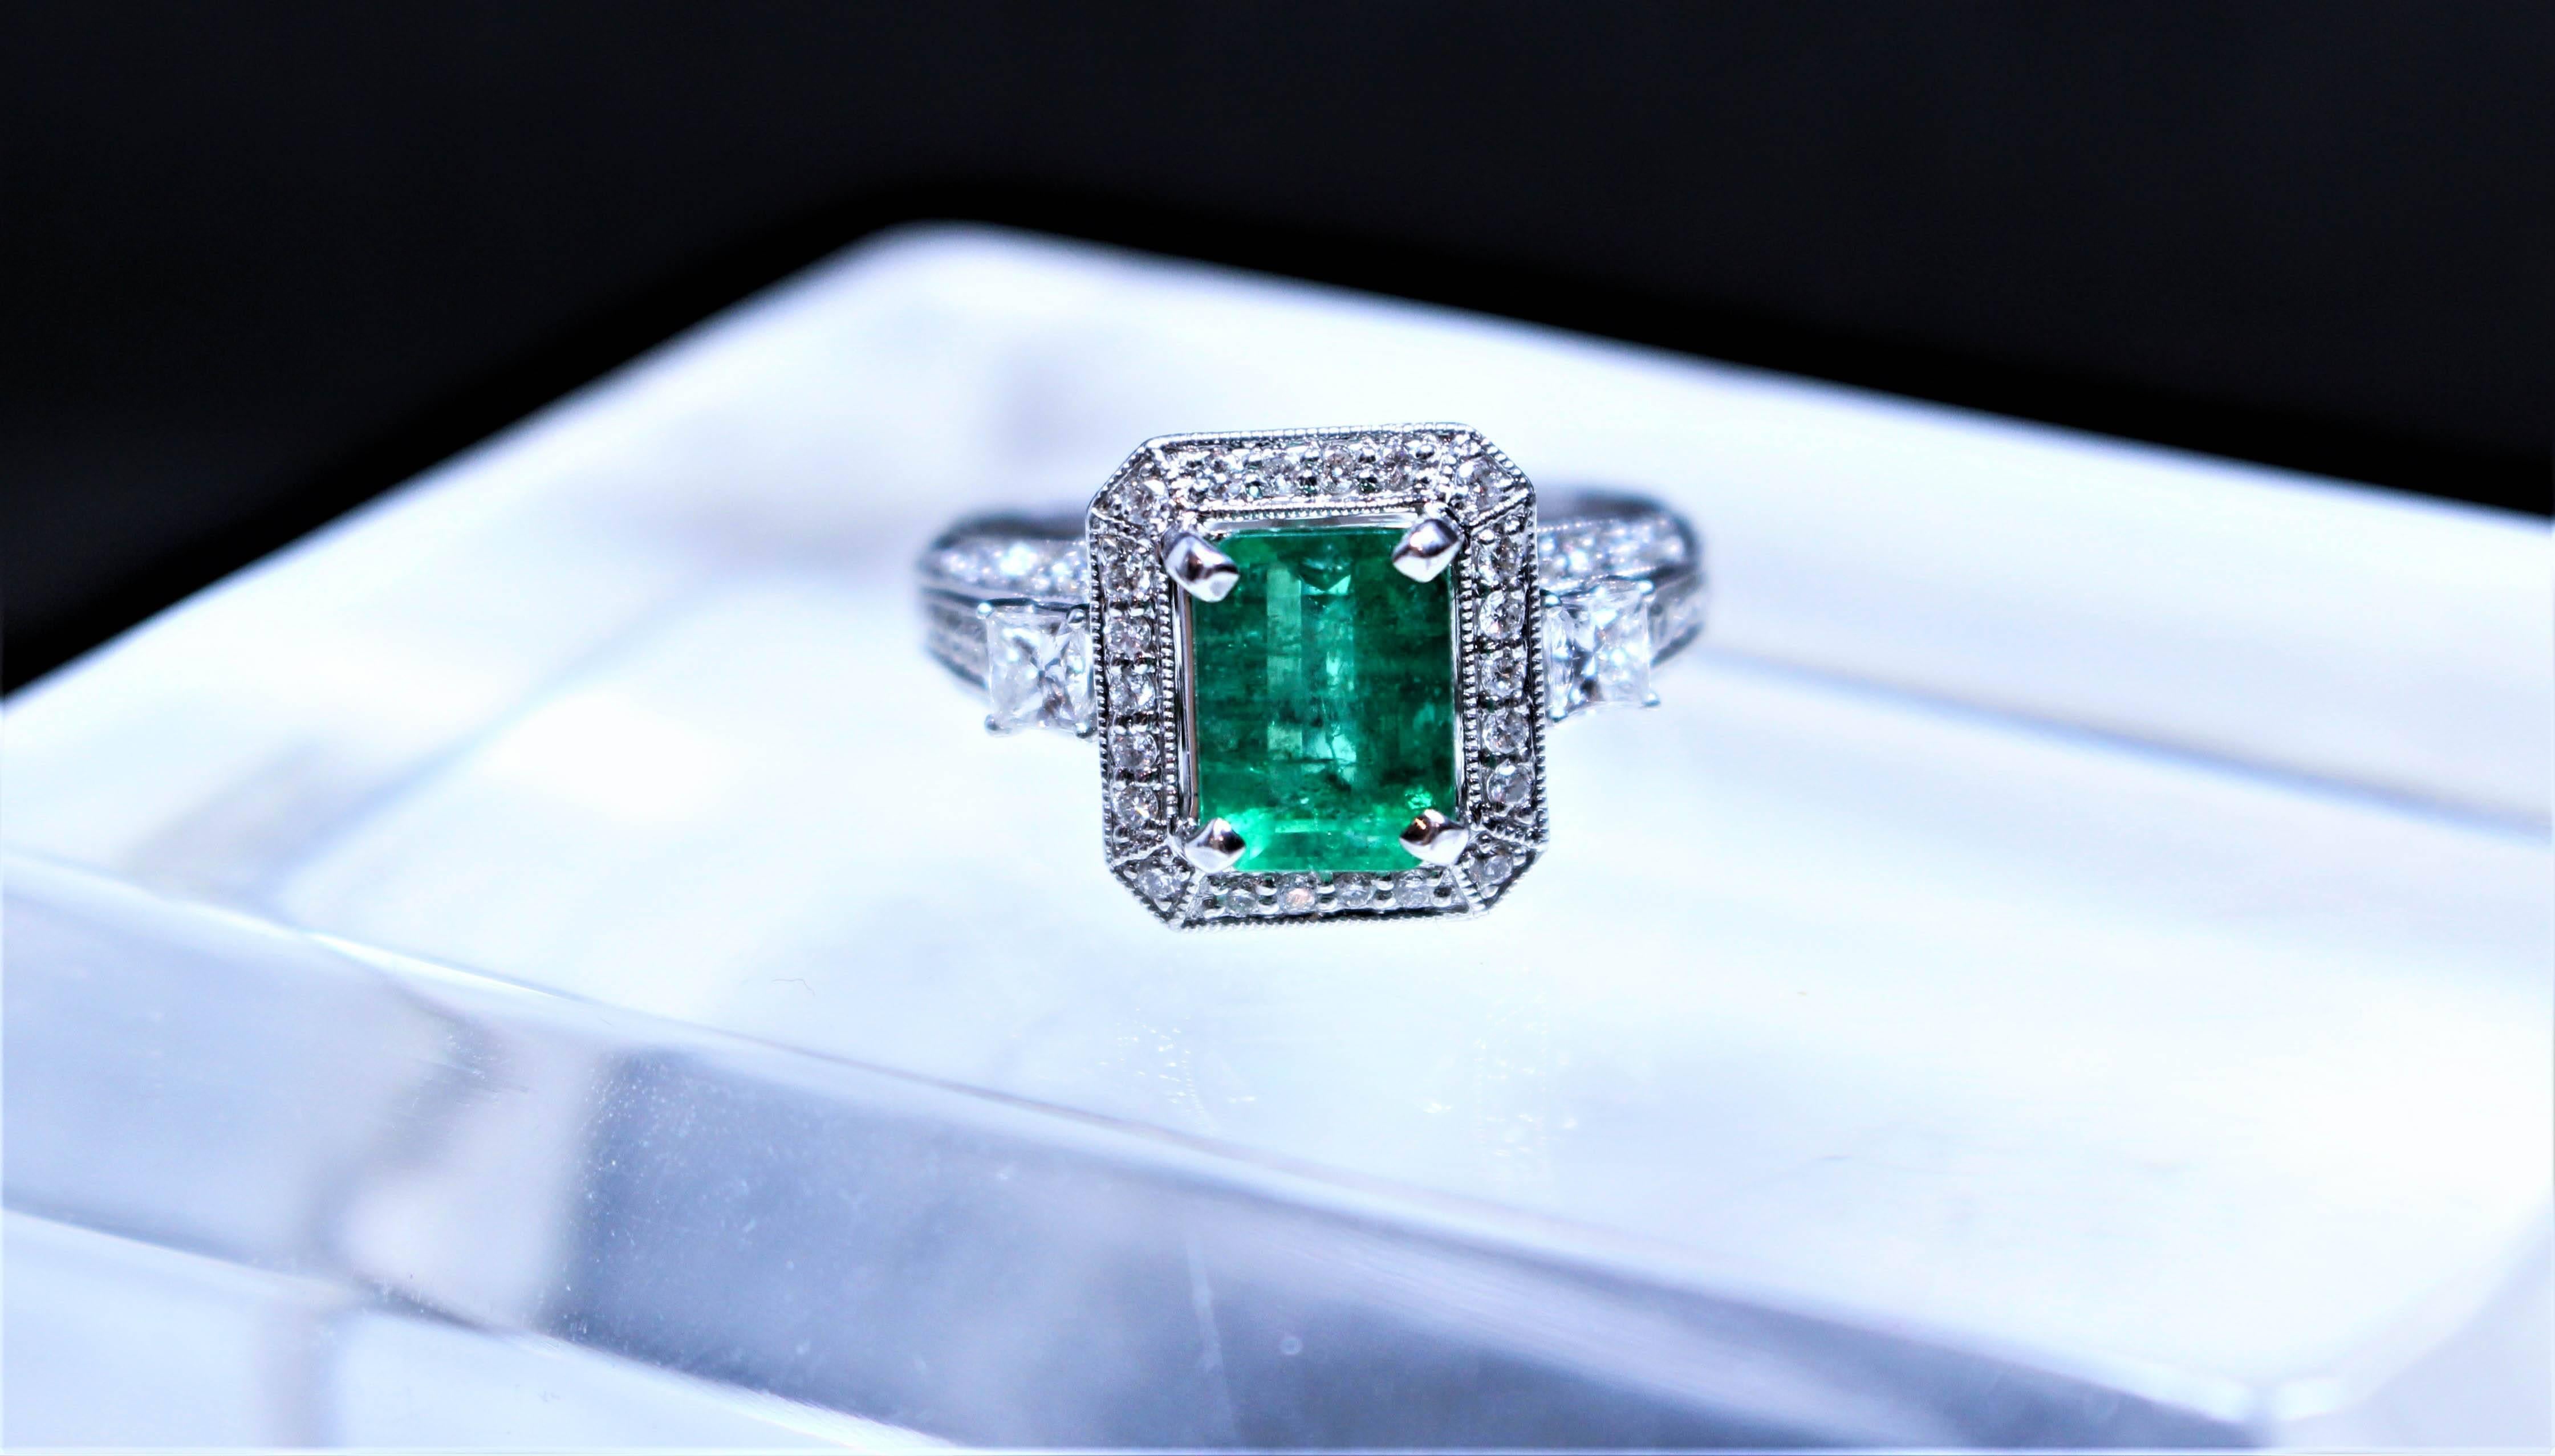 This ring is composed of 18kt white gold and features a stunning Emerald center stone with an approximate 1.92 carats. The filigree setting boosts approximately 68 round cut pave diamonds and two larger square cut stones flanking the center stone.